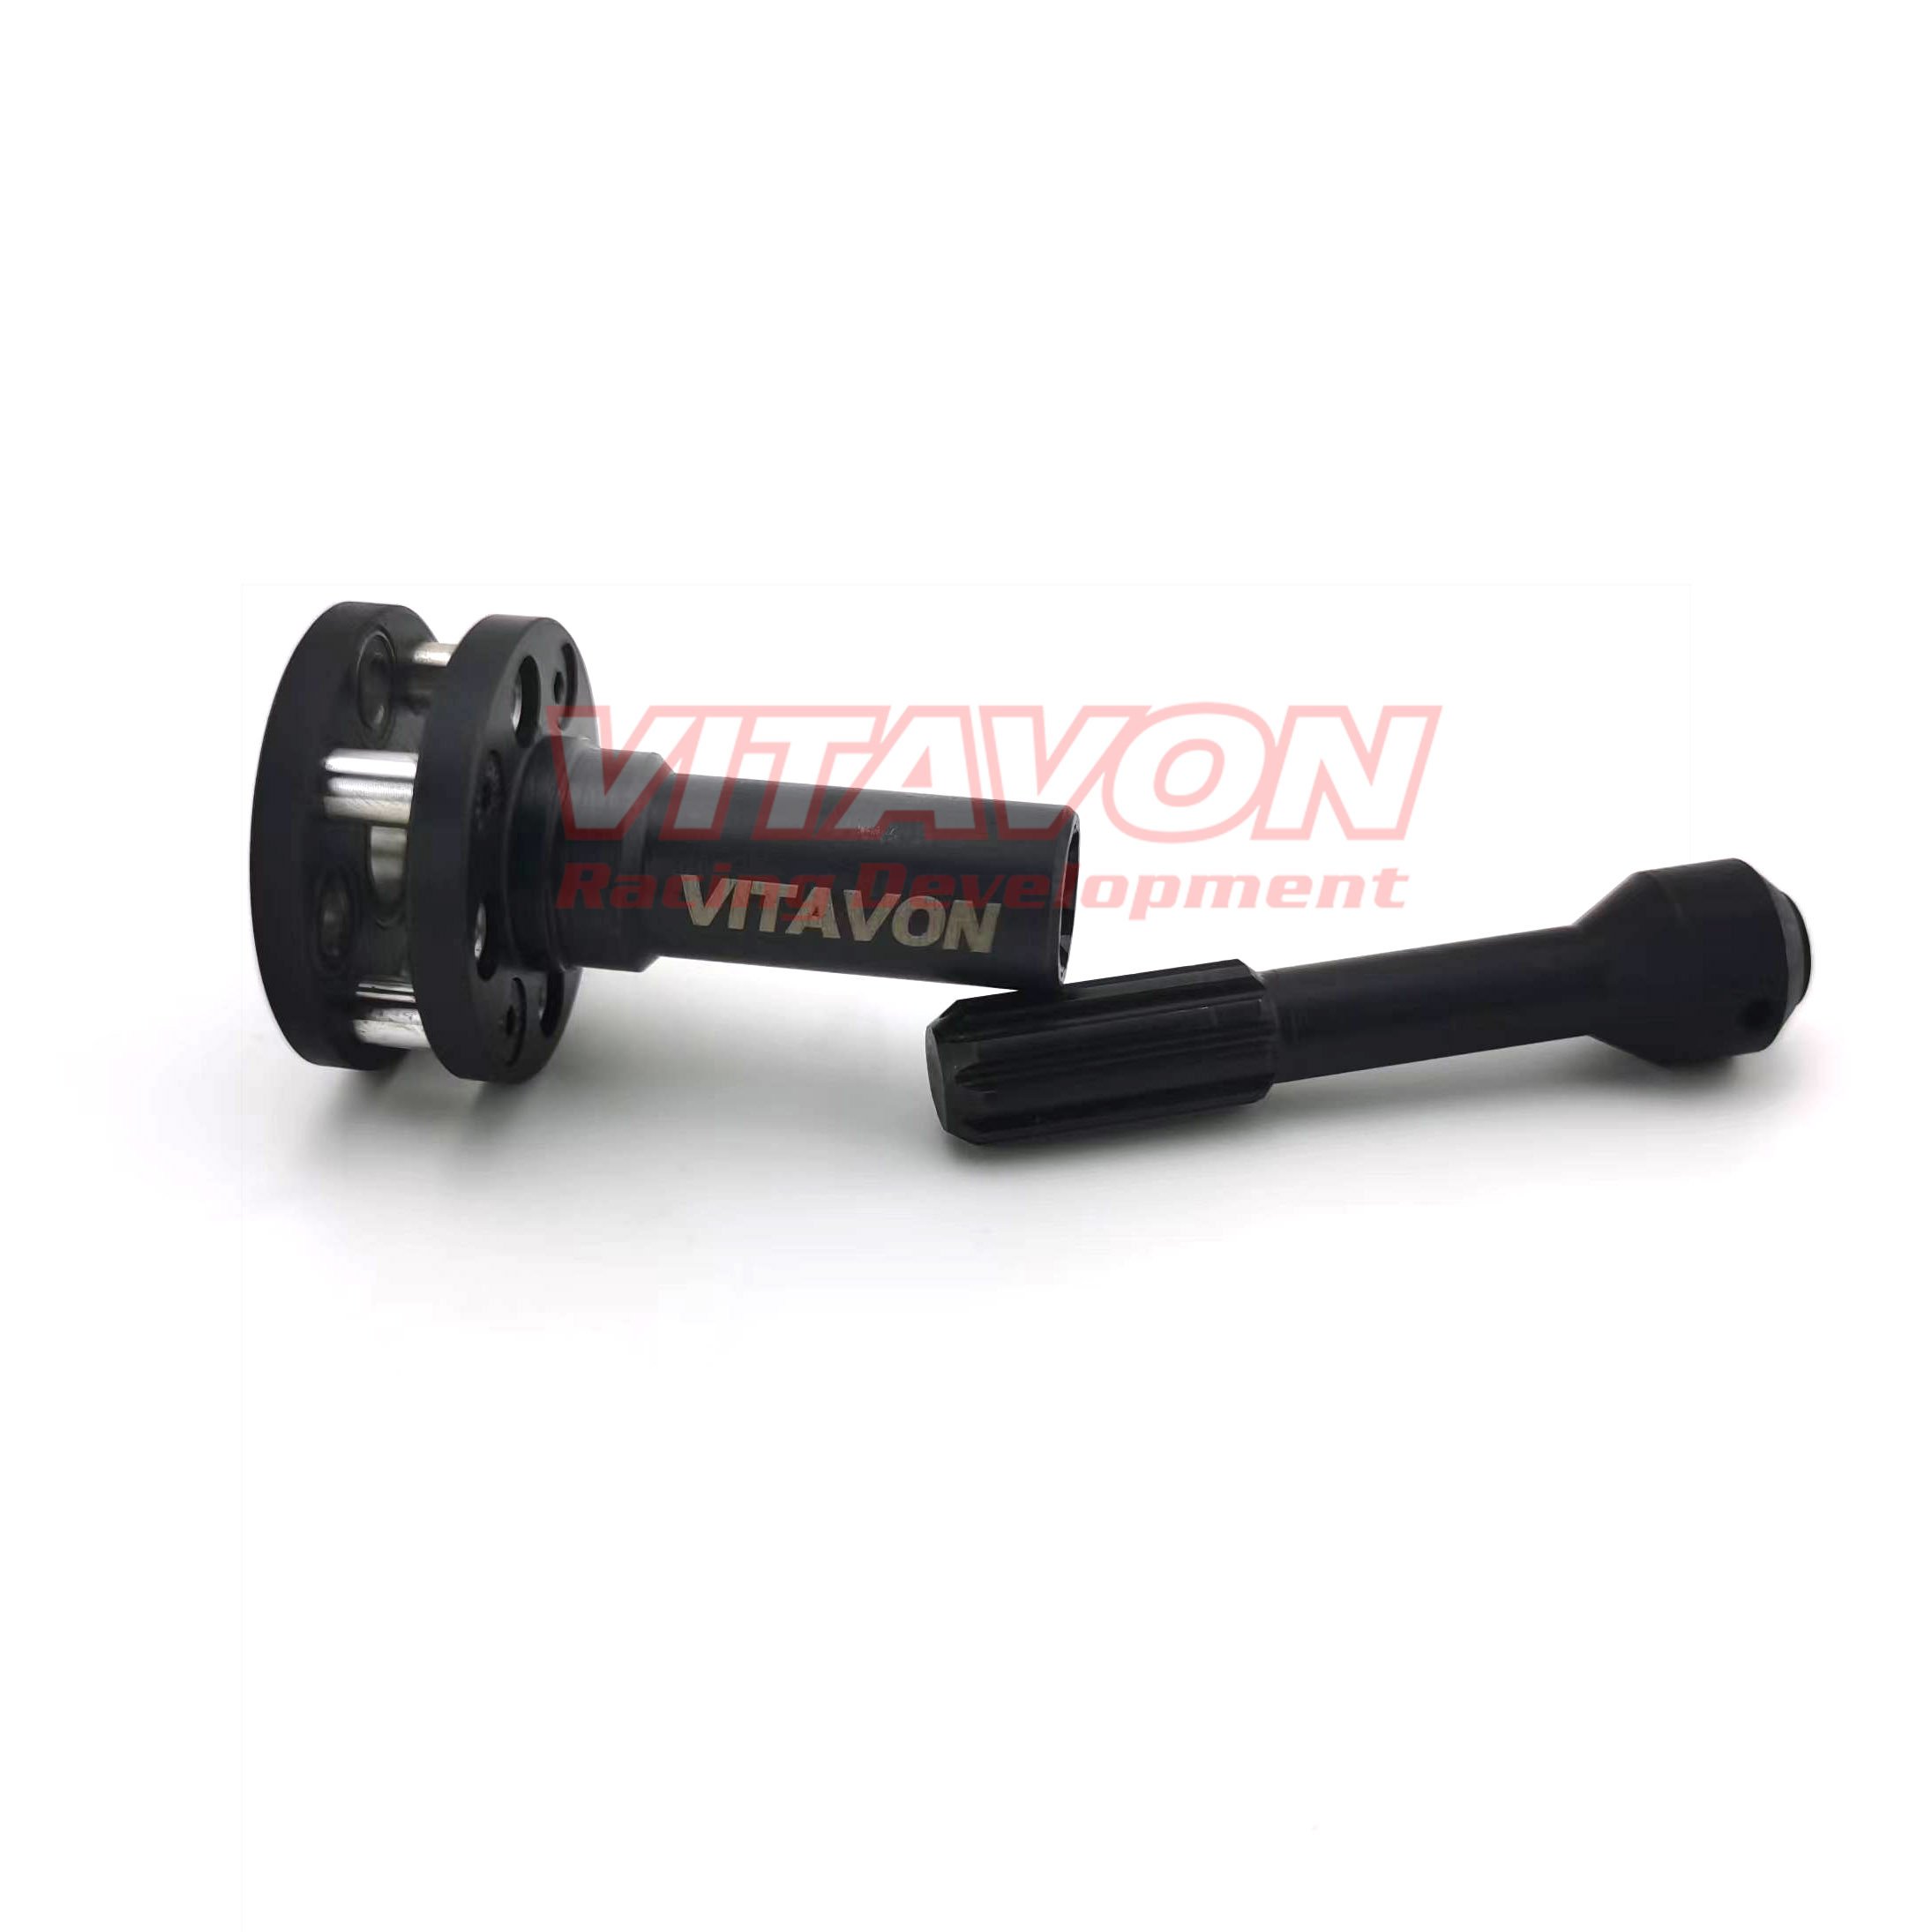 VITAVON HD Steel Front Center Drive Shaft+Planetary Gear Housing For Traxxas UDR 1/7 